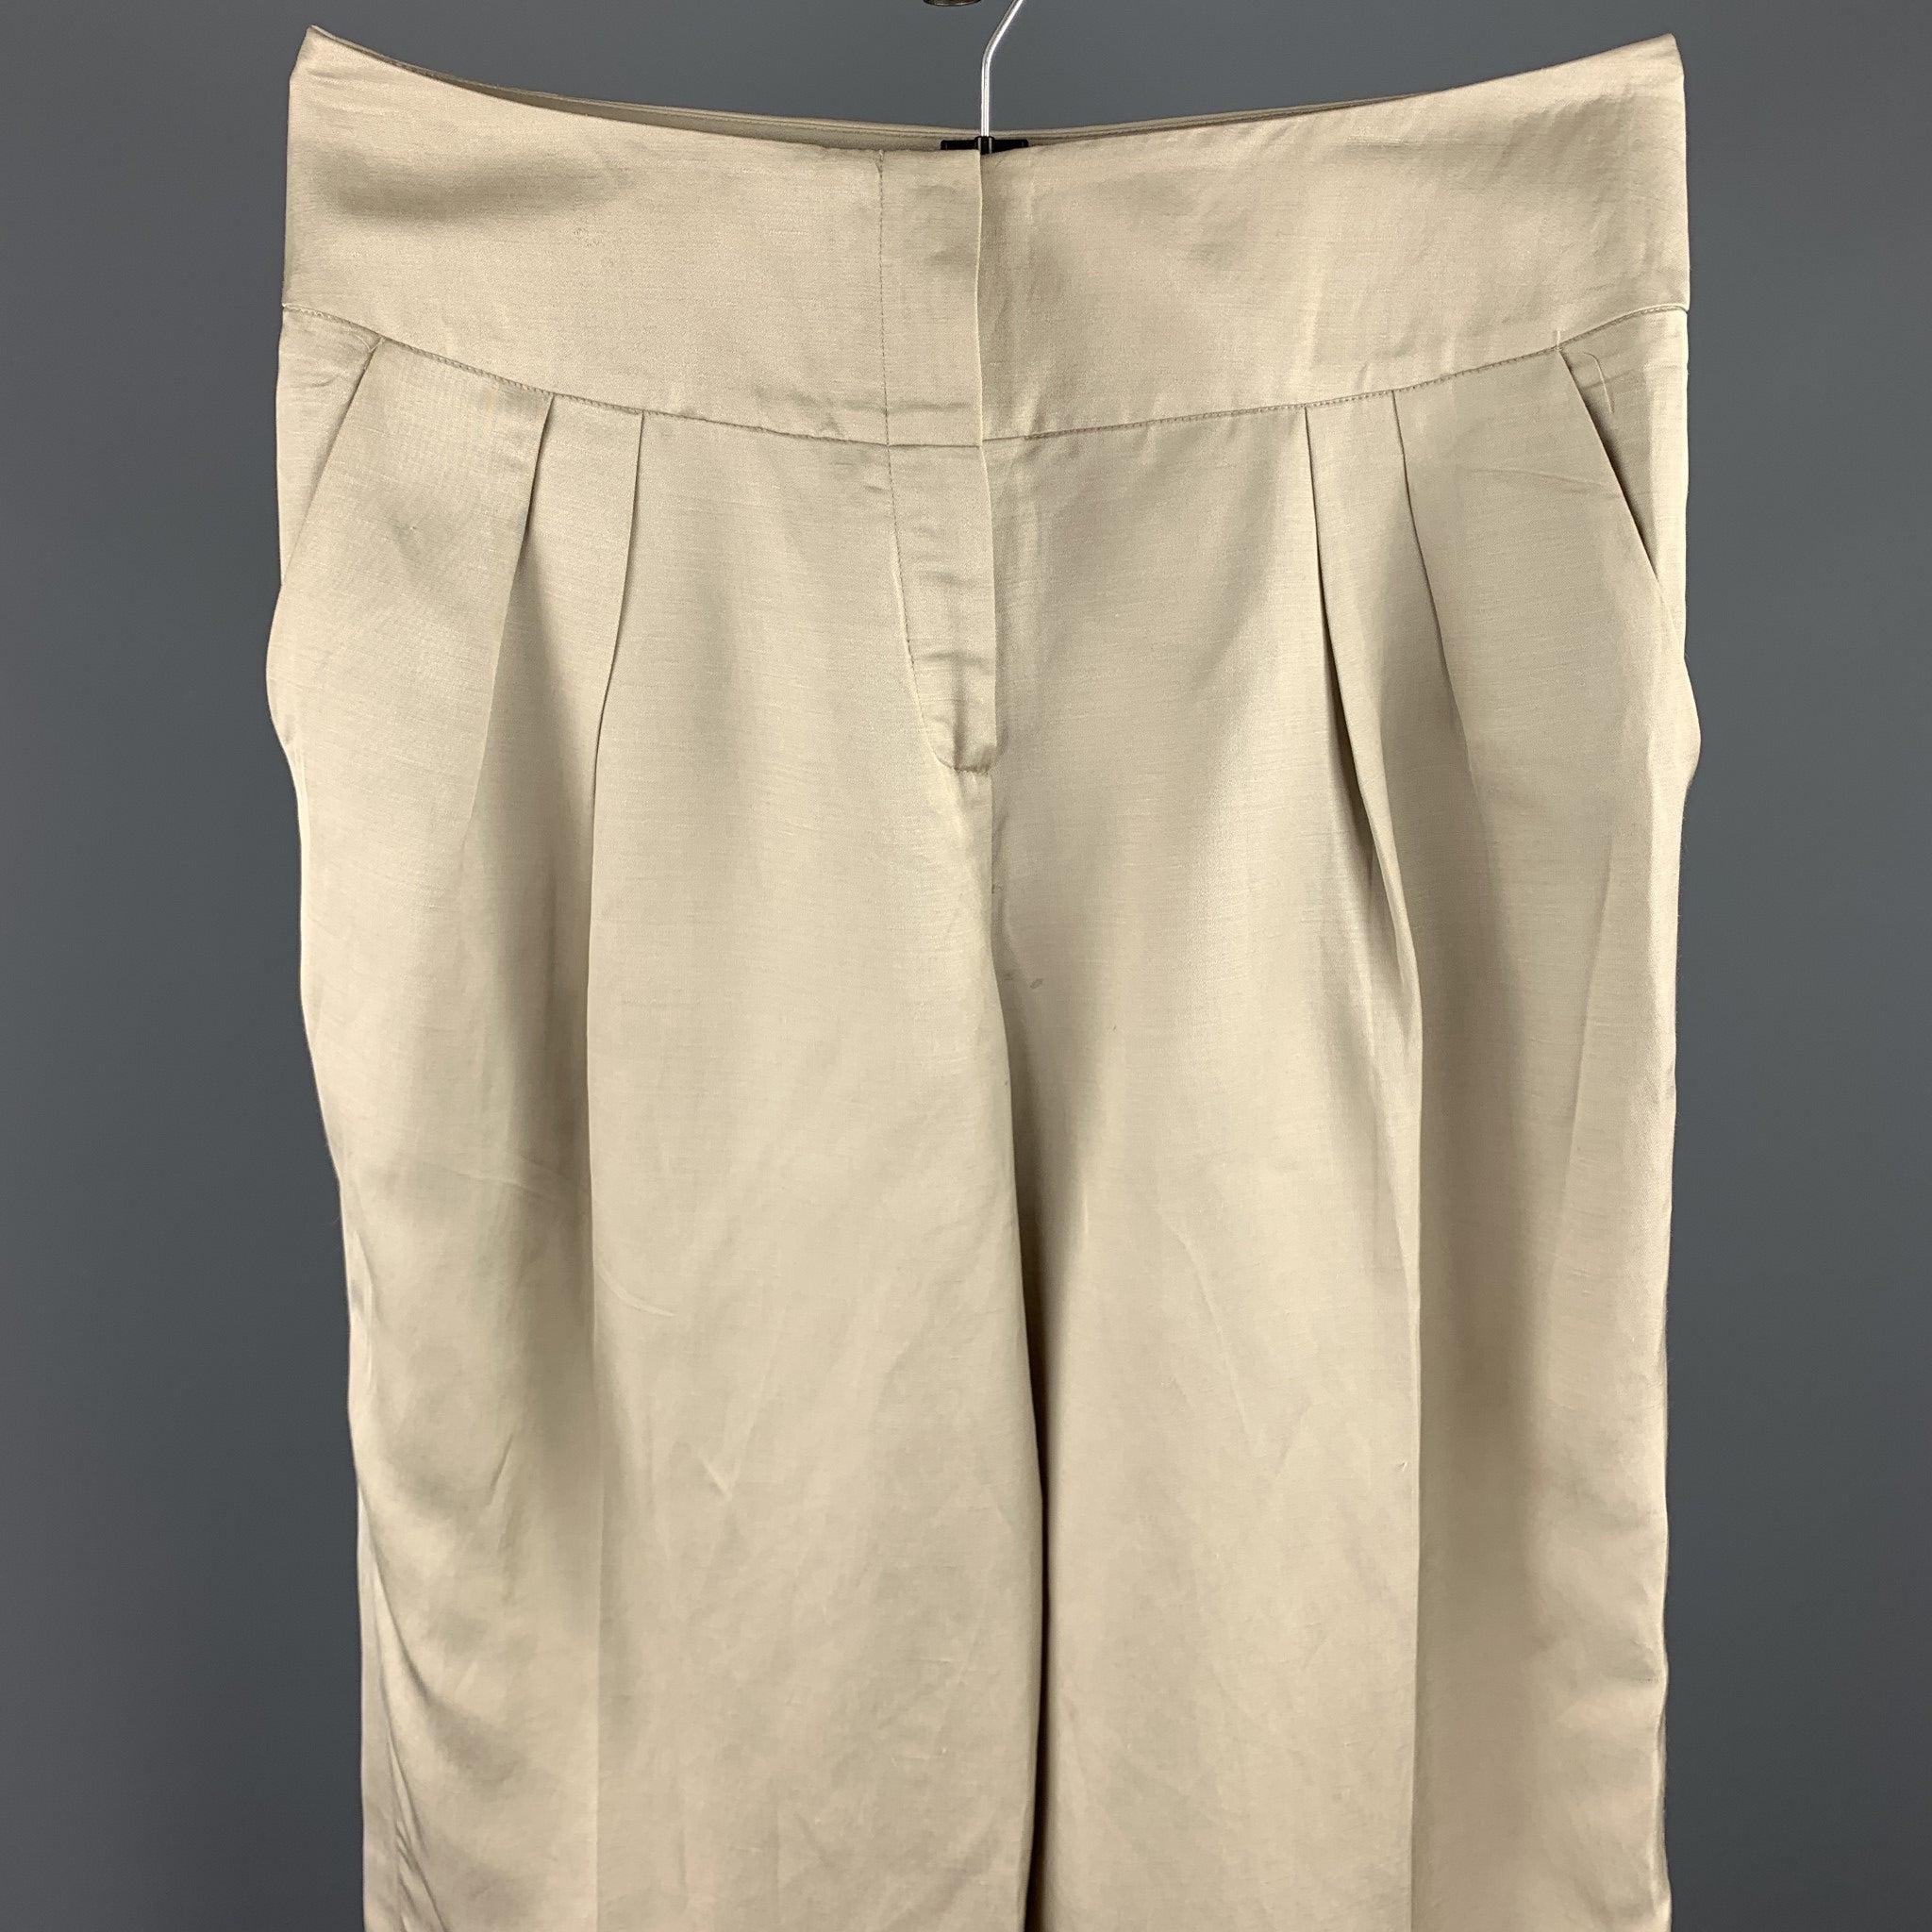 OSCAR DE LA RENTA dress pants comes in a beige linen blend featuring a cropped wide leg style, pleated, slit pockets, and a zip up closure. Made in Italy.Very Good
Pre-Owned Condition. 

Marked:   8 

Measurements: 
  Waist: 30 inches 
Rise: 9